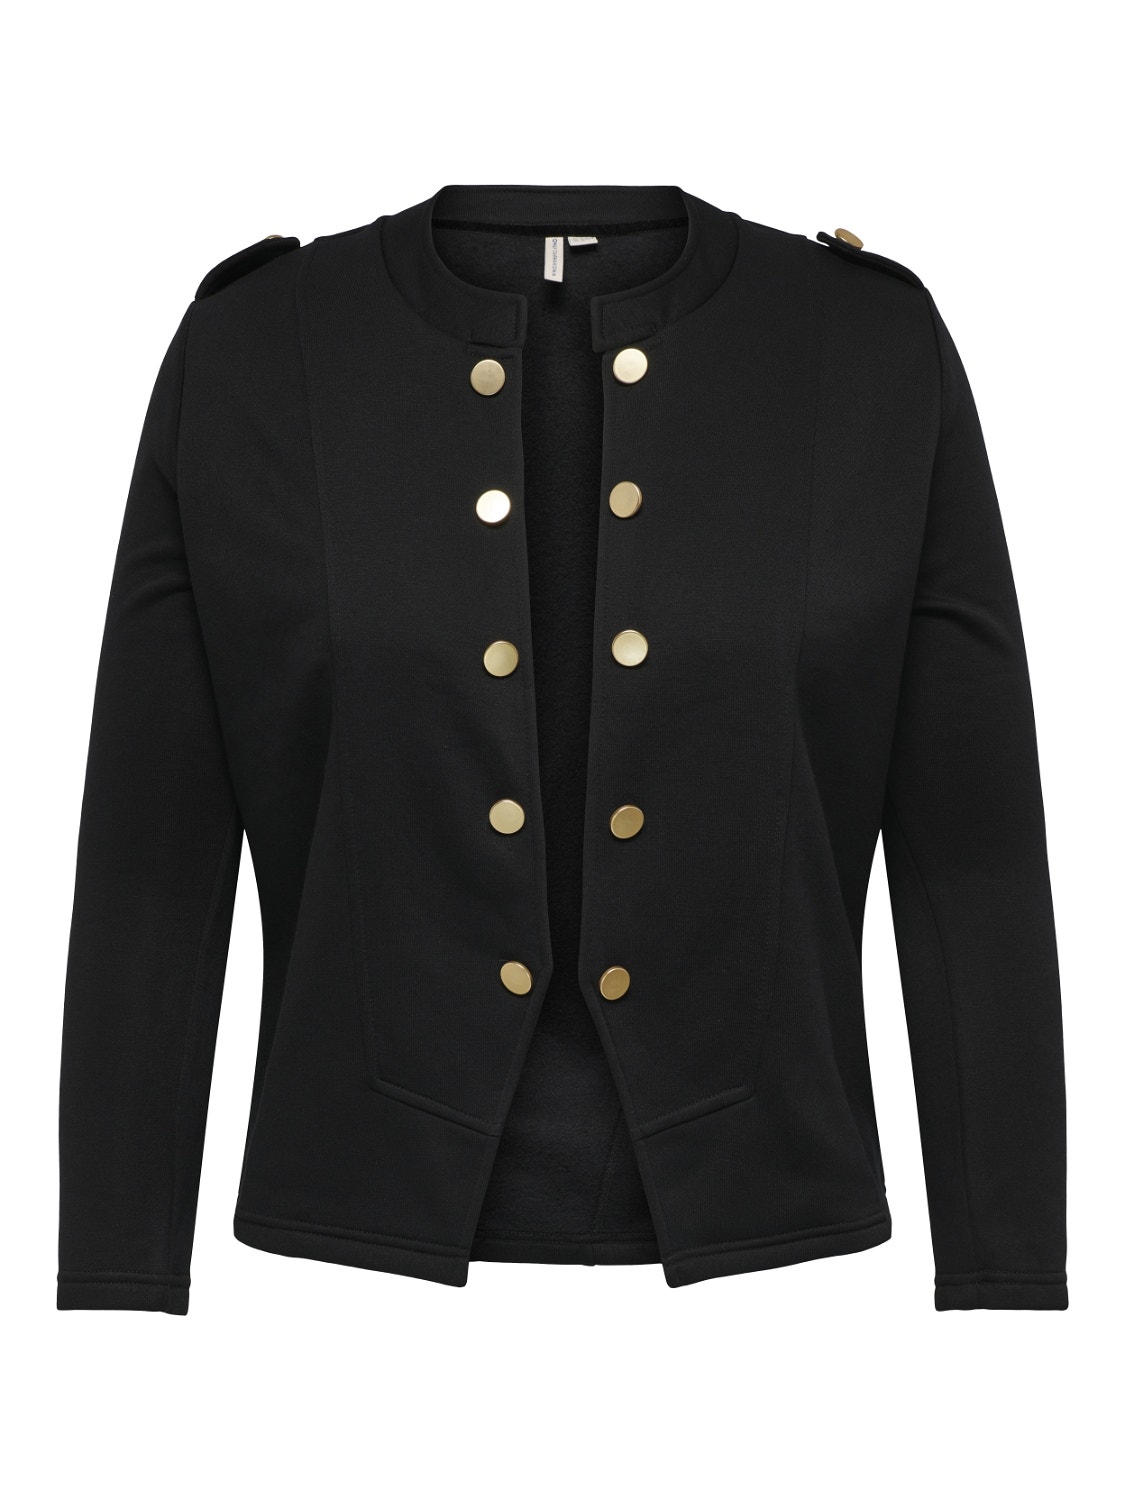 ONLY Finitions voluptueuses Blazer -Black - 15252600